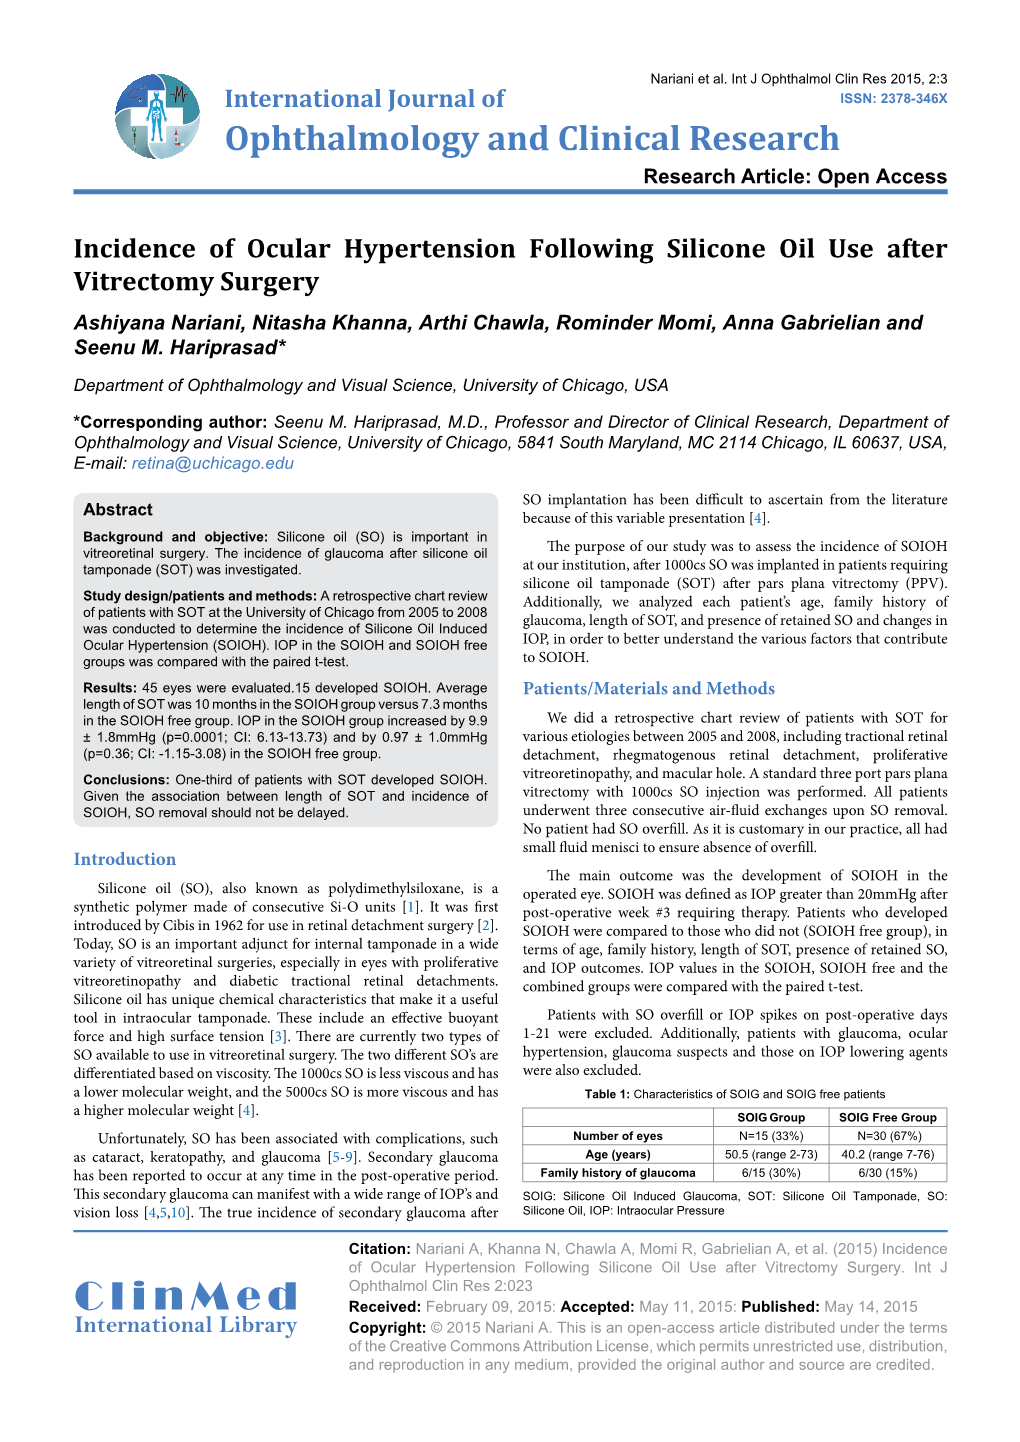 Incidence of Ocular Hypertension Following Silicone Oil Use After